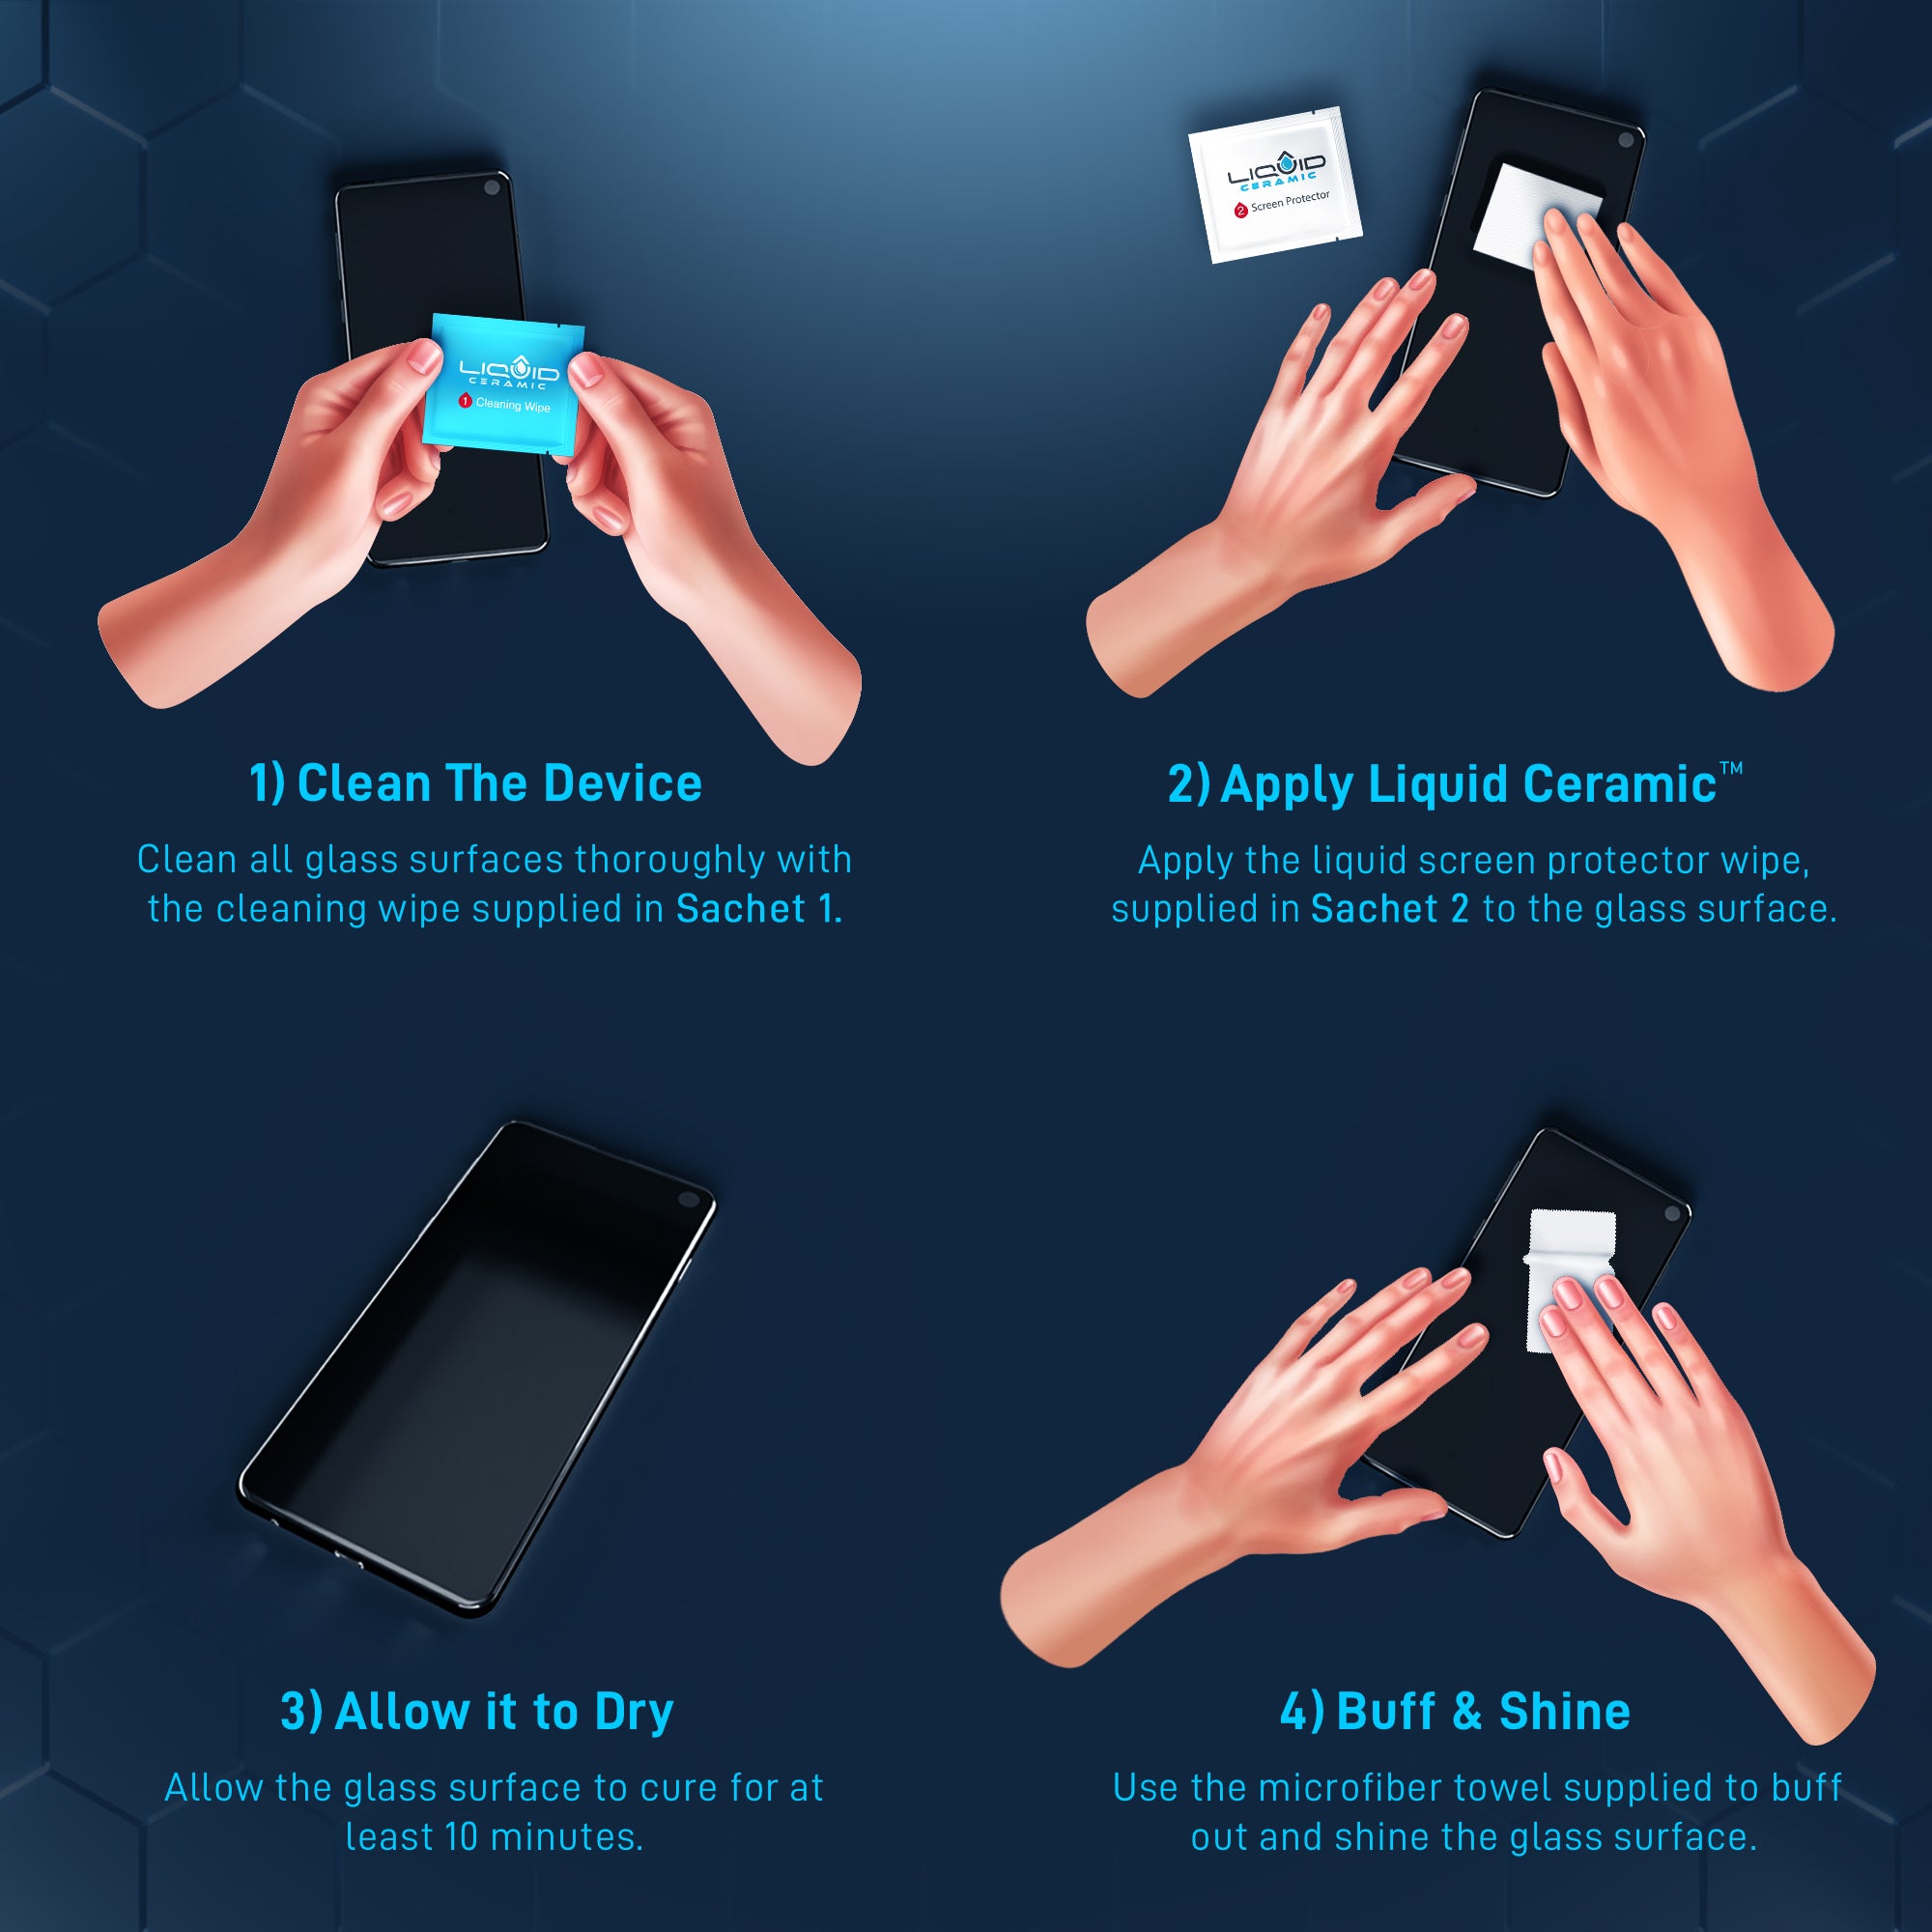 Liquid Ceramic Screen Protector with $300 Guarantee for All Phones Tablets and Smart Watches